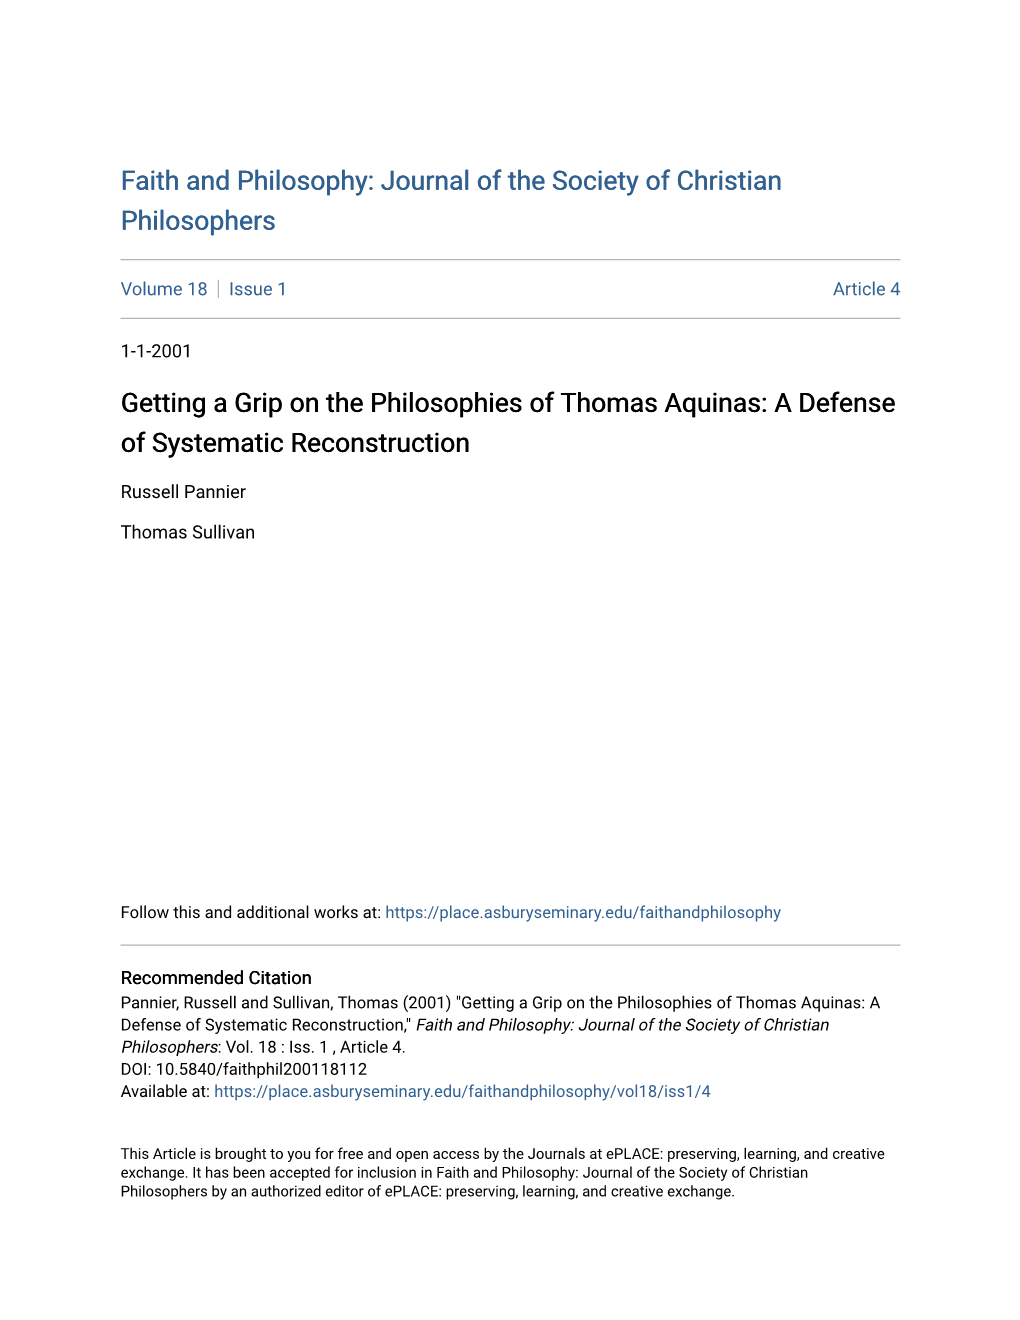 Getting a Grip on the Philosophies of Thomas Aquinas: a Defense of Systematic Reconstruction